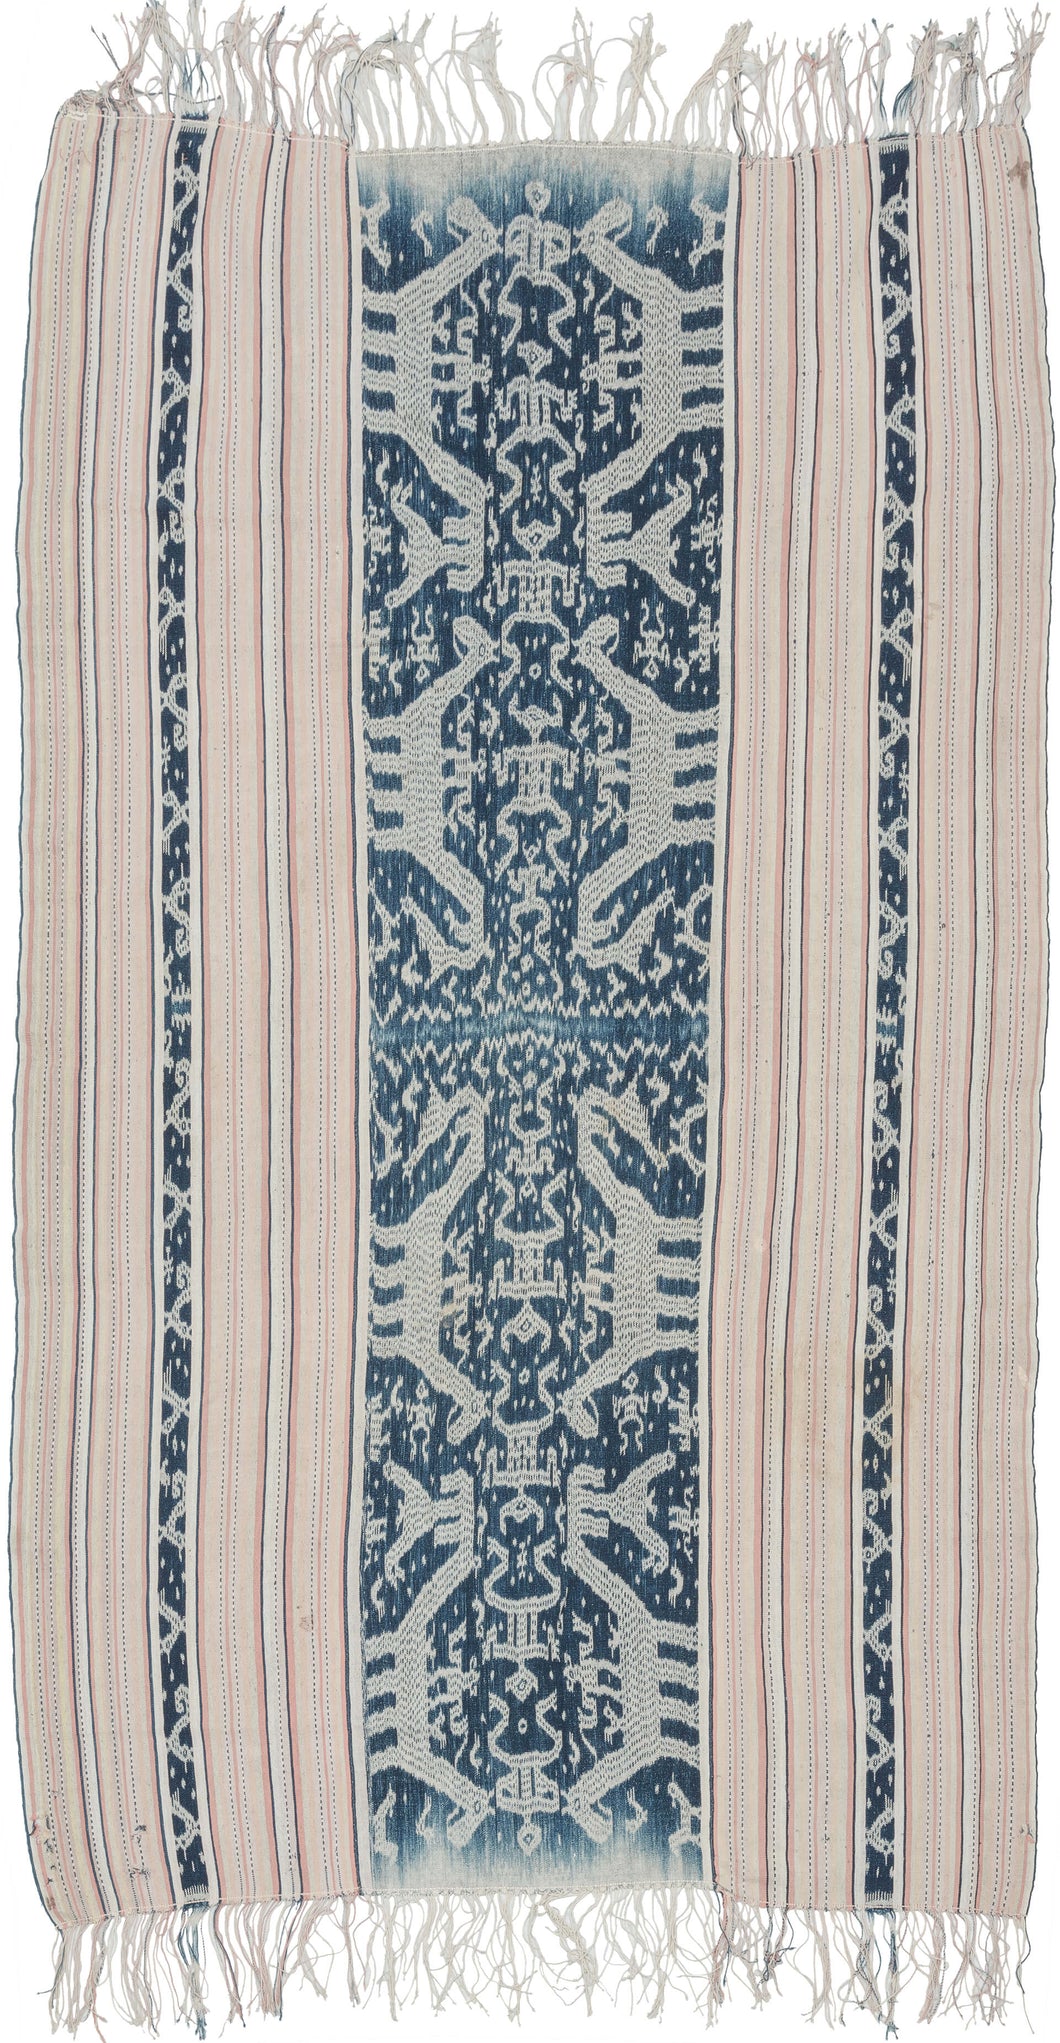 This ikat was handmade on the island of Sumba in Indonesia during the middle of the 20th century.  Ikat is a warp resist dyeing technique similar to 